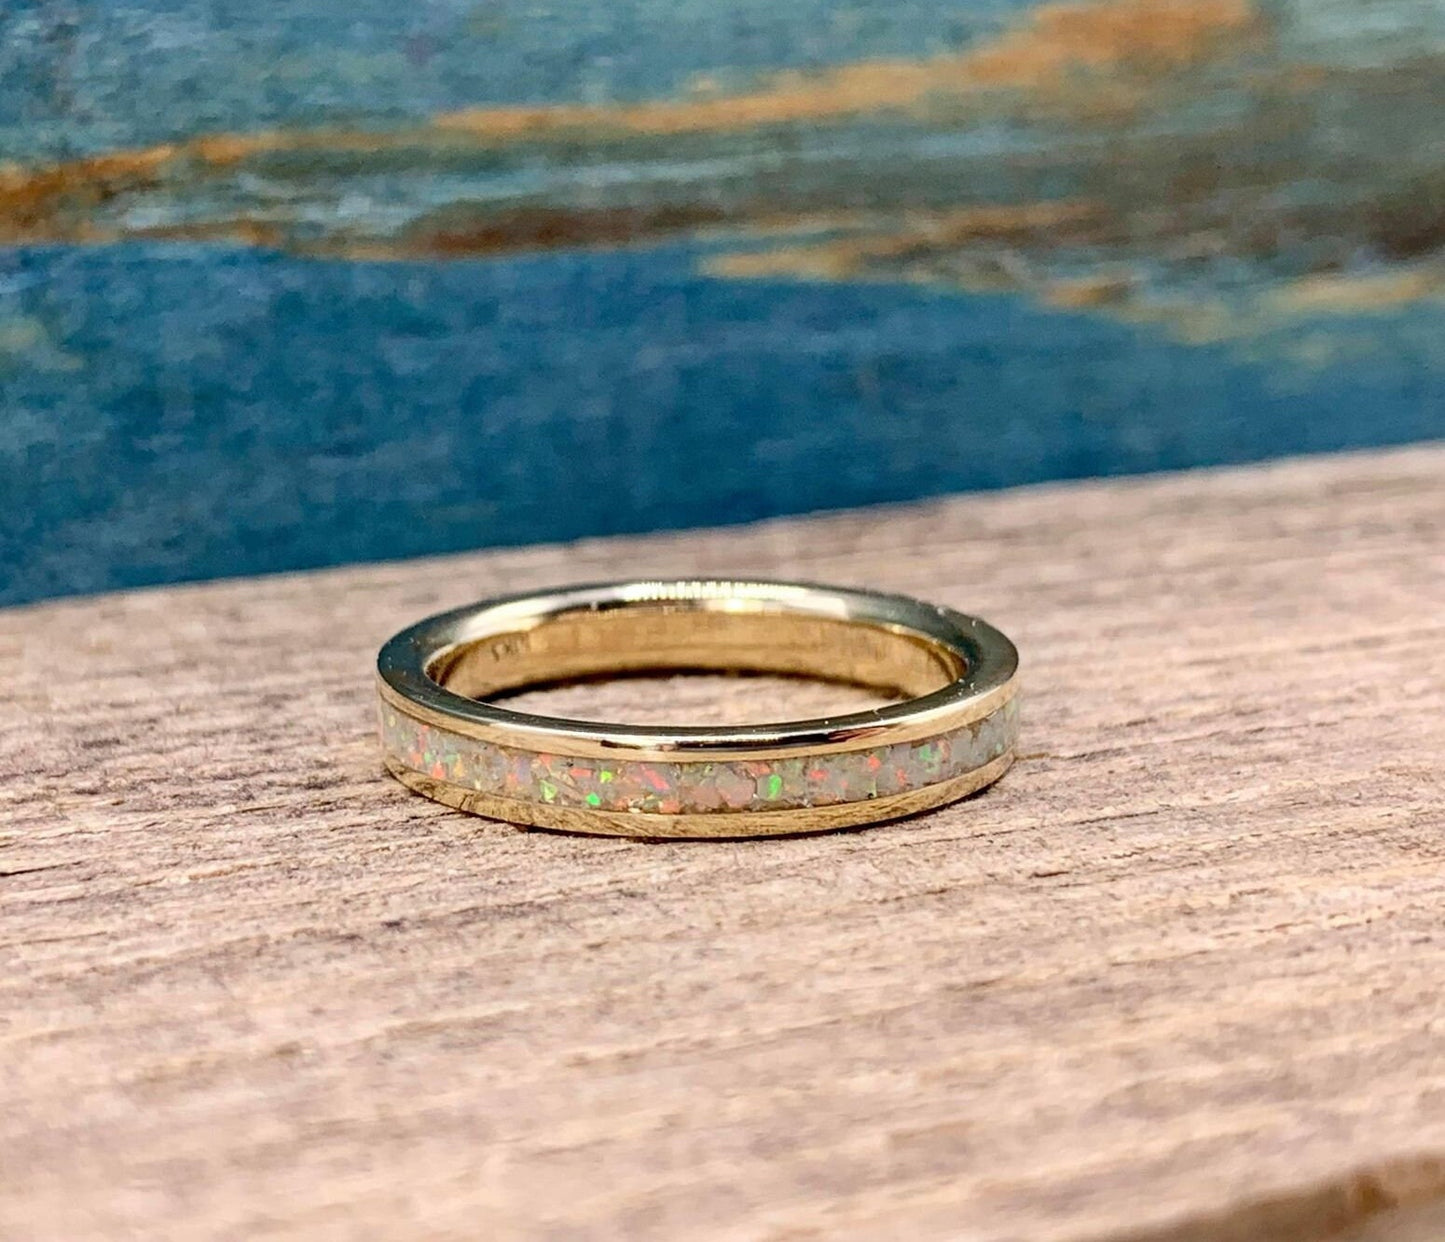 10K Gold and White Opal Engagement Band- Custom Made Ring- 3MM Yellow Gold Opal Inlay Ring - Personalized Gift for her - Robandlean